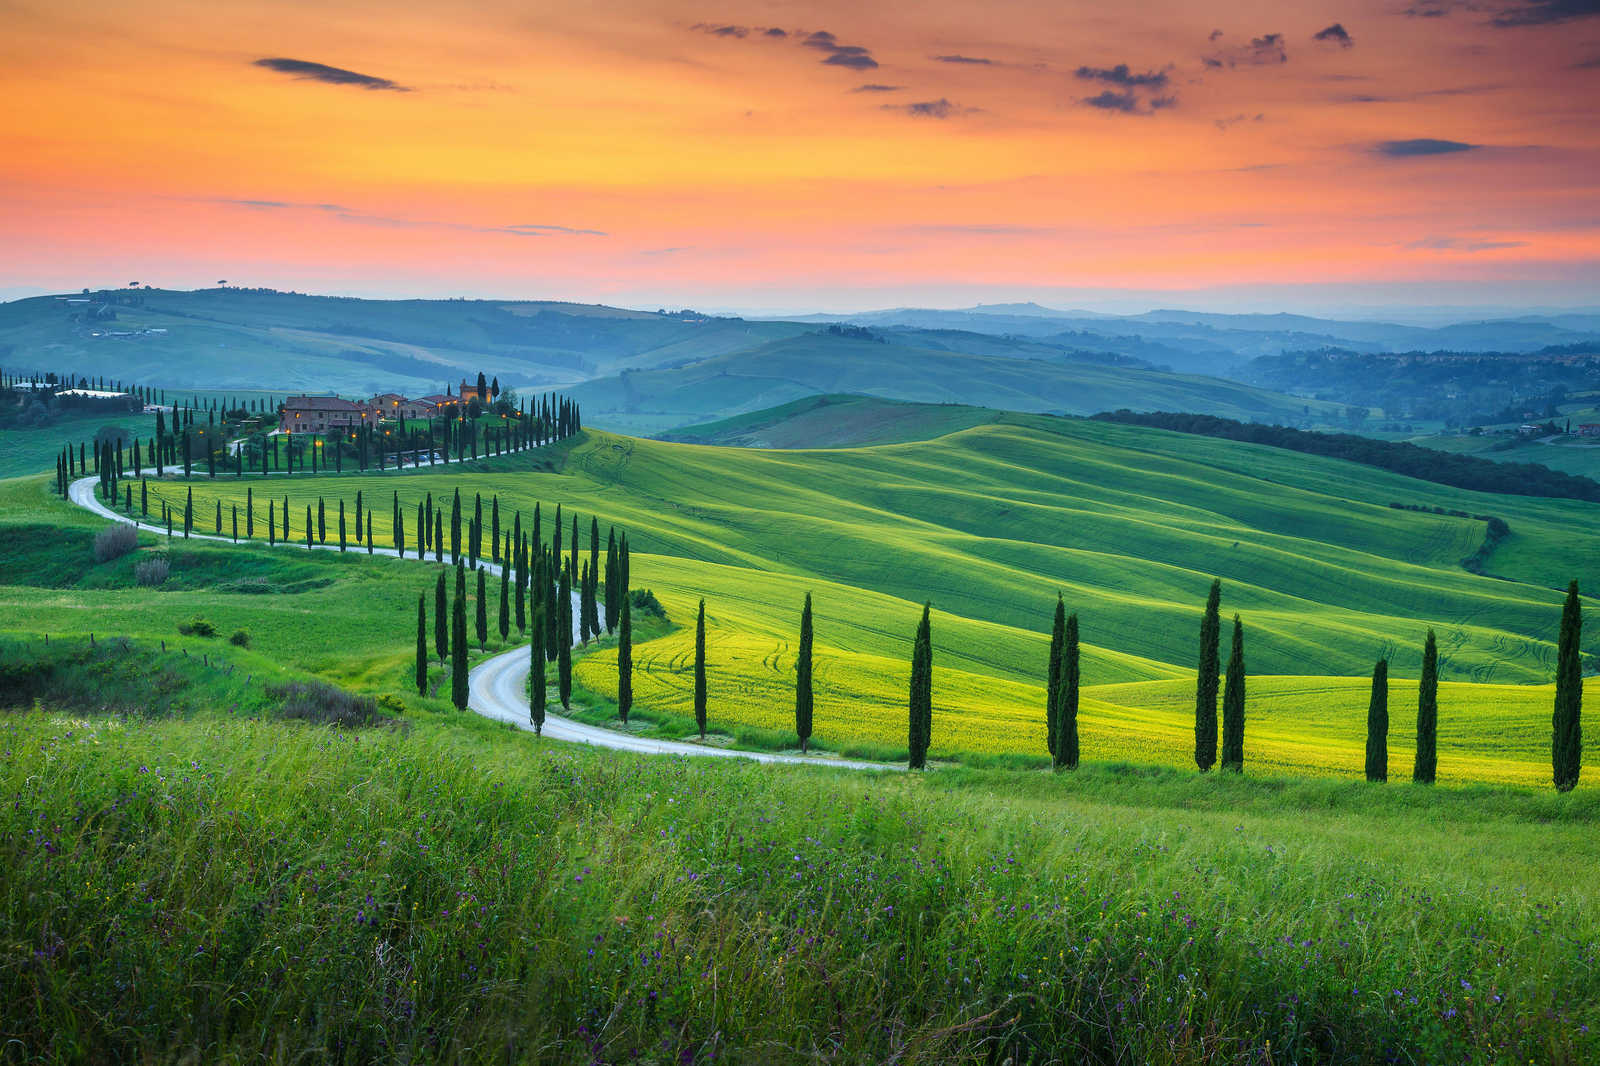             Canvas Tuscany in the sunrise - 0.90 m x 0.60 m
        